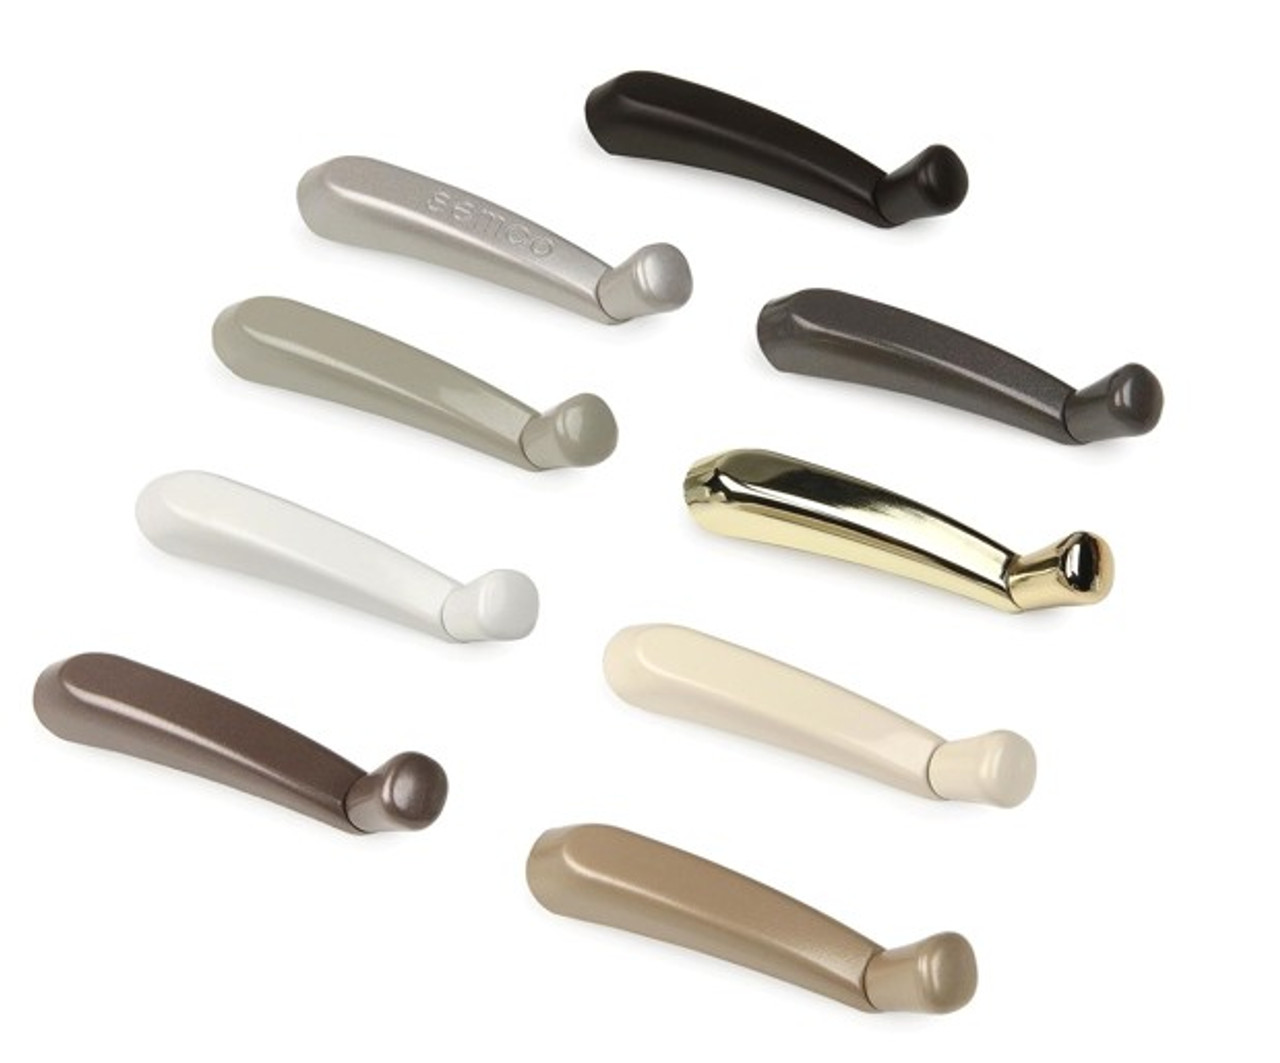 Hurd (CONTOUR FOLDING) crank handle used on  casement and awnings  manufactured February 1998 to 9/19/05